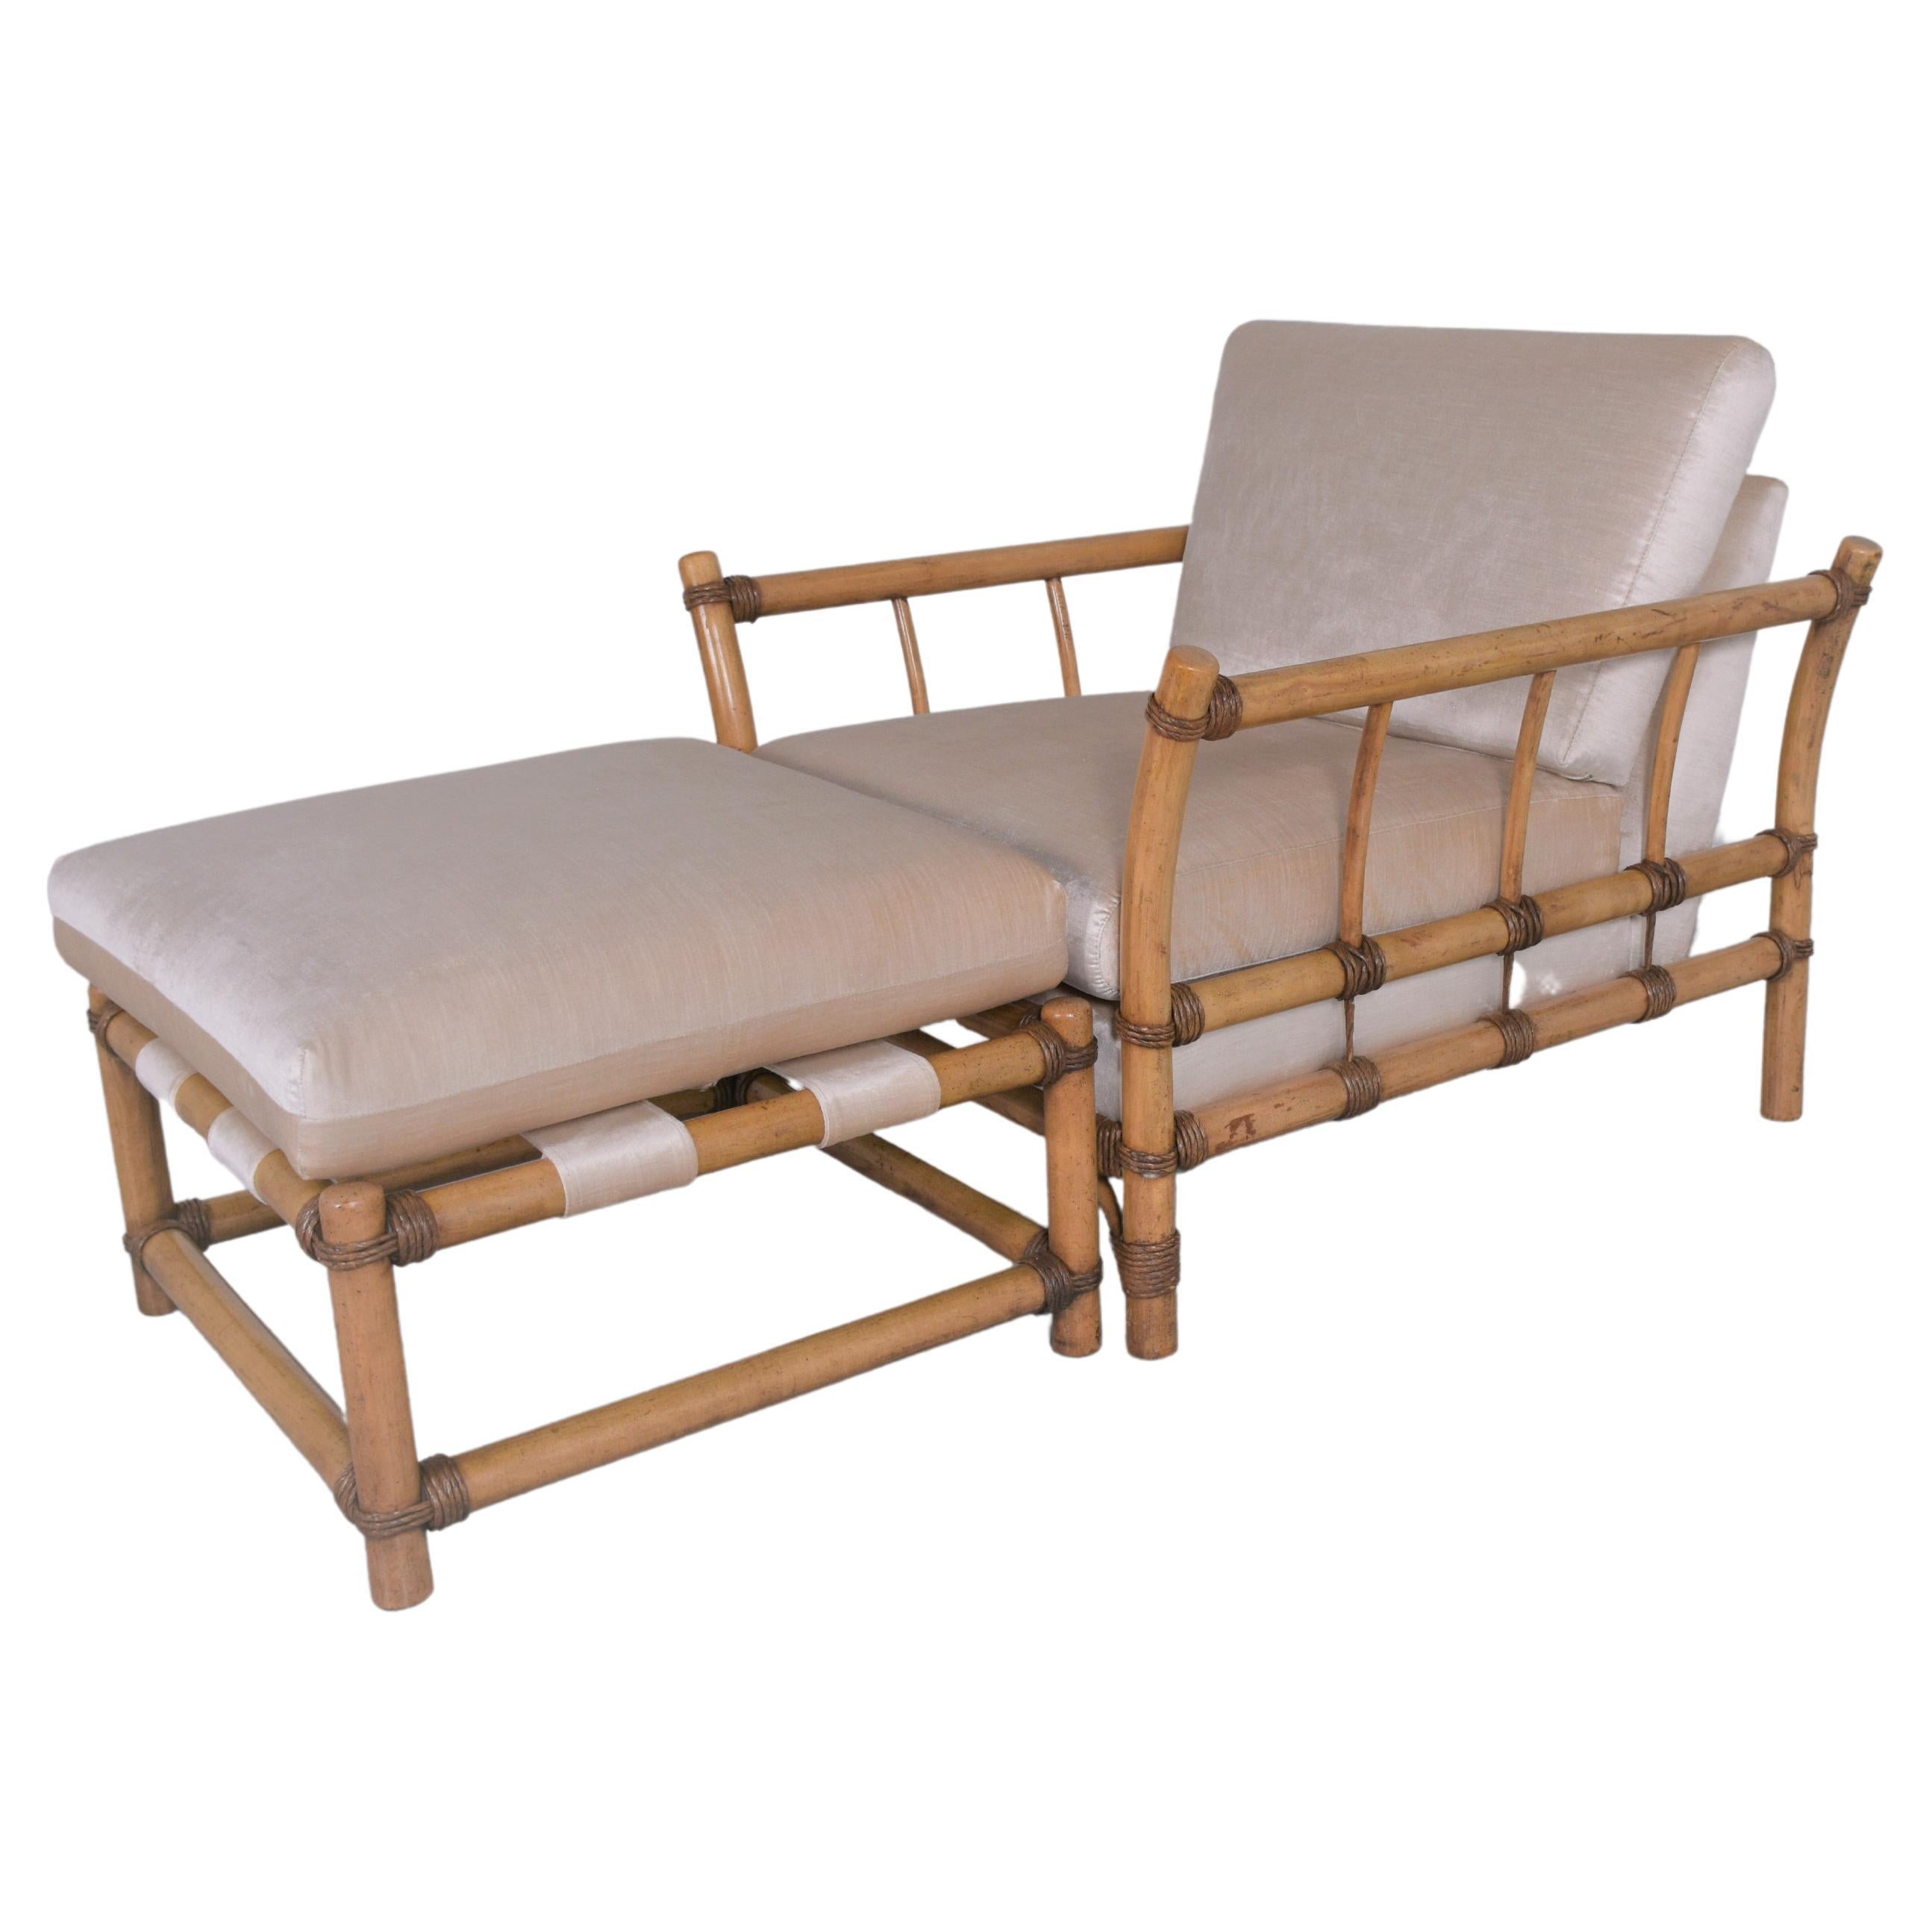 Discover a piece of retro luxury with our vintage 1970s mid-century modern bamboo-style chaise lounge, meticulously restored by our in-house team of professional craftsmen. This chaise lounge is an exemplar of classic design and comfort, making it a